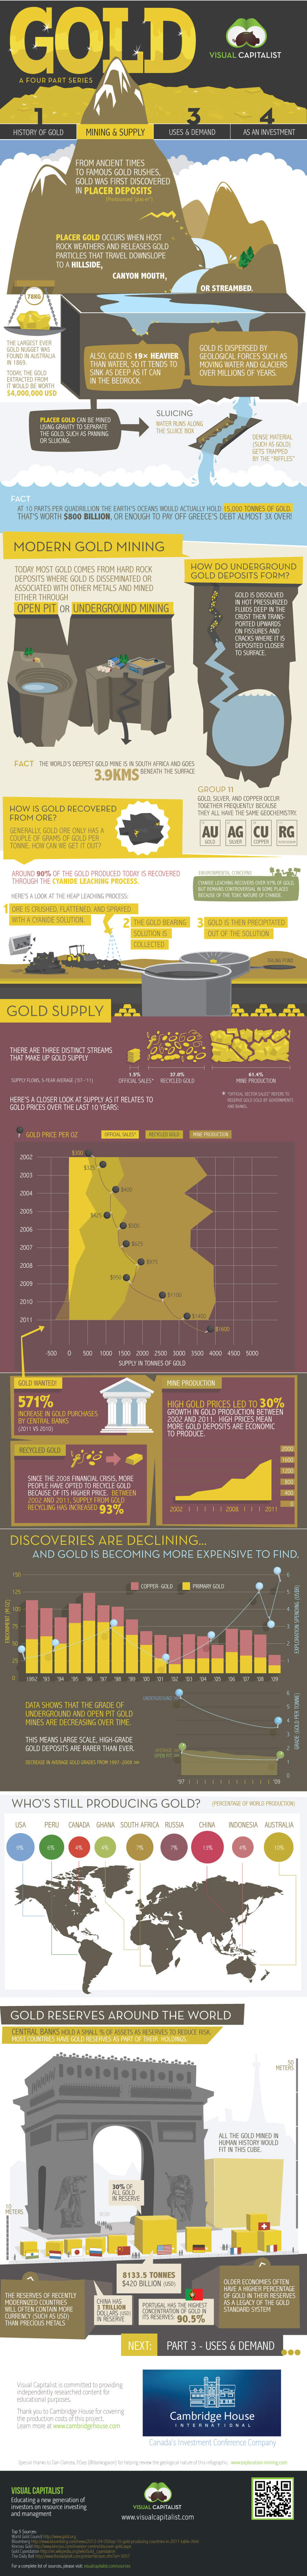 gold-mining-supply-infographic-2